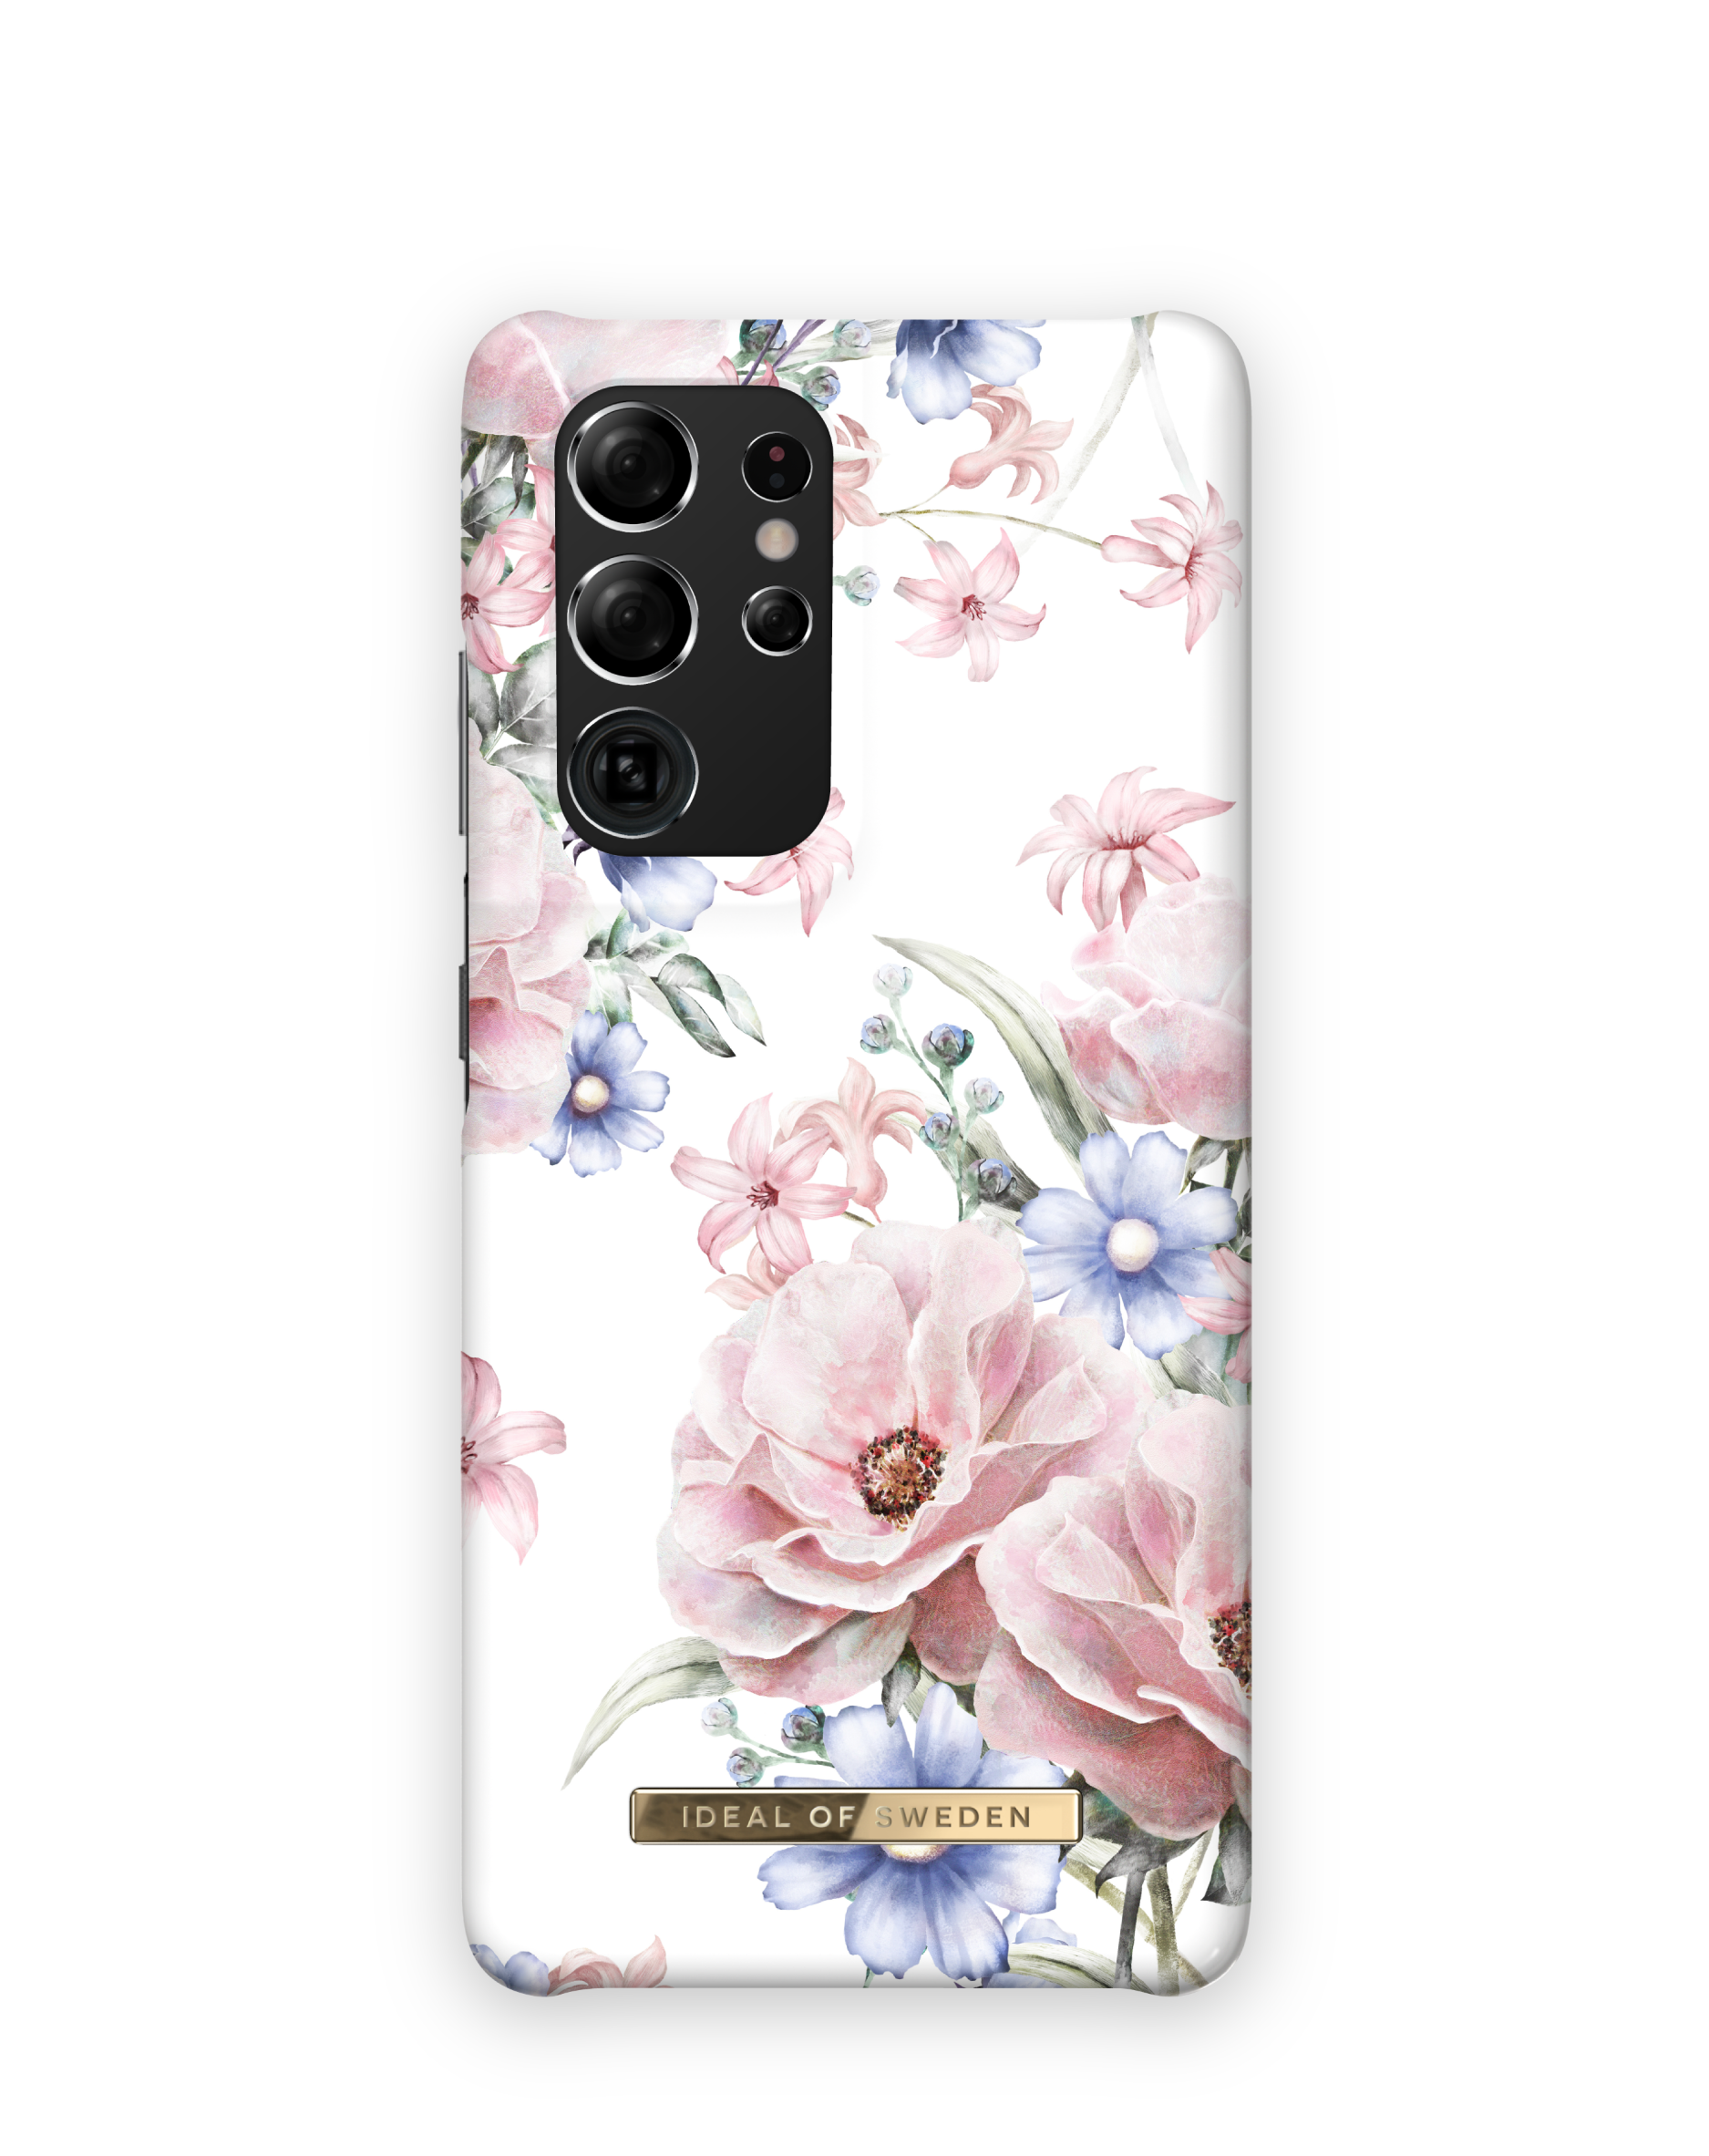 IDEAL OF SWEDEN IDFCS17-S21U-58, Backcover, Ultra, S21 Samsung, Galaxy Floral Romance